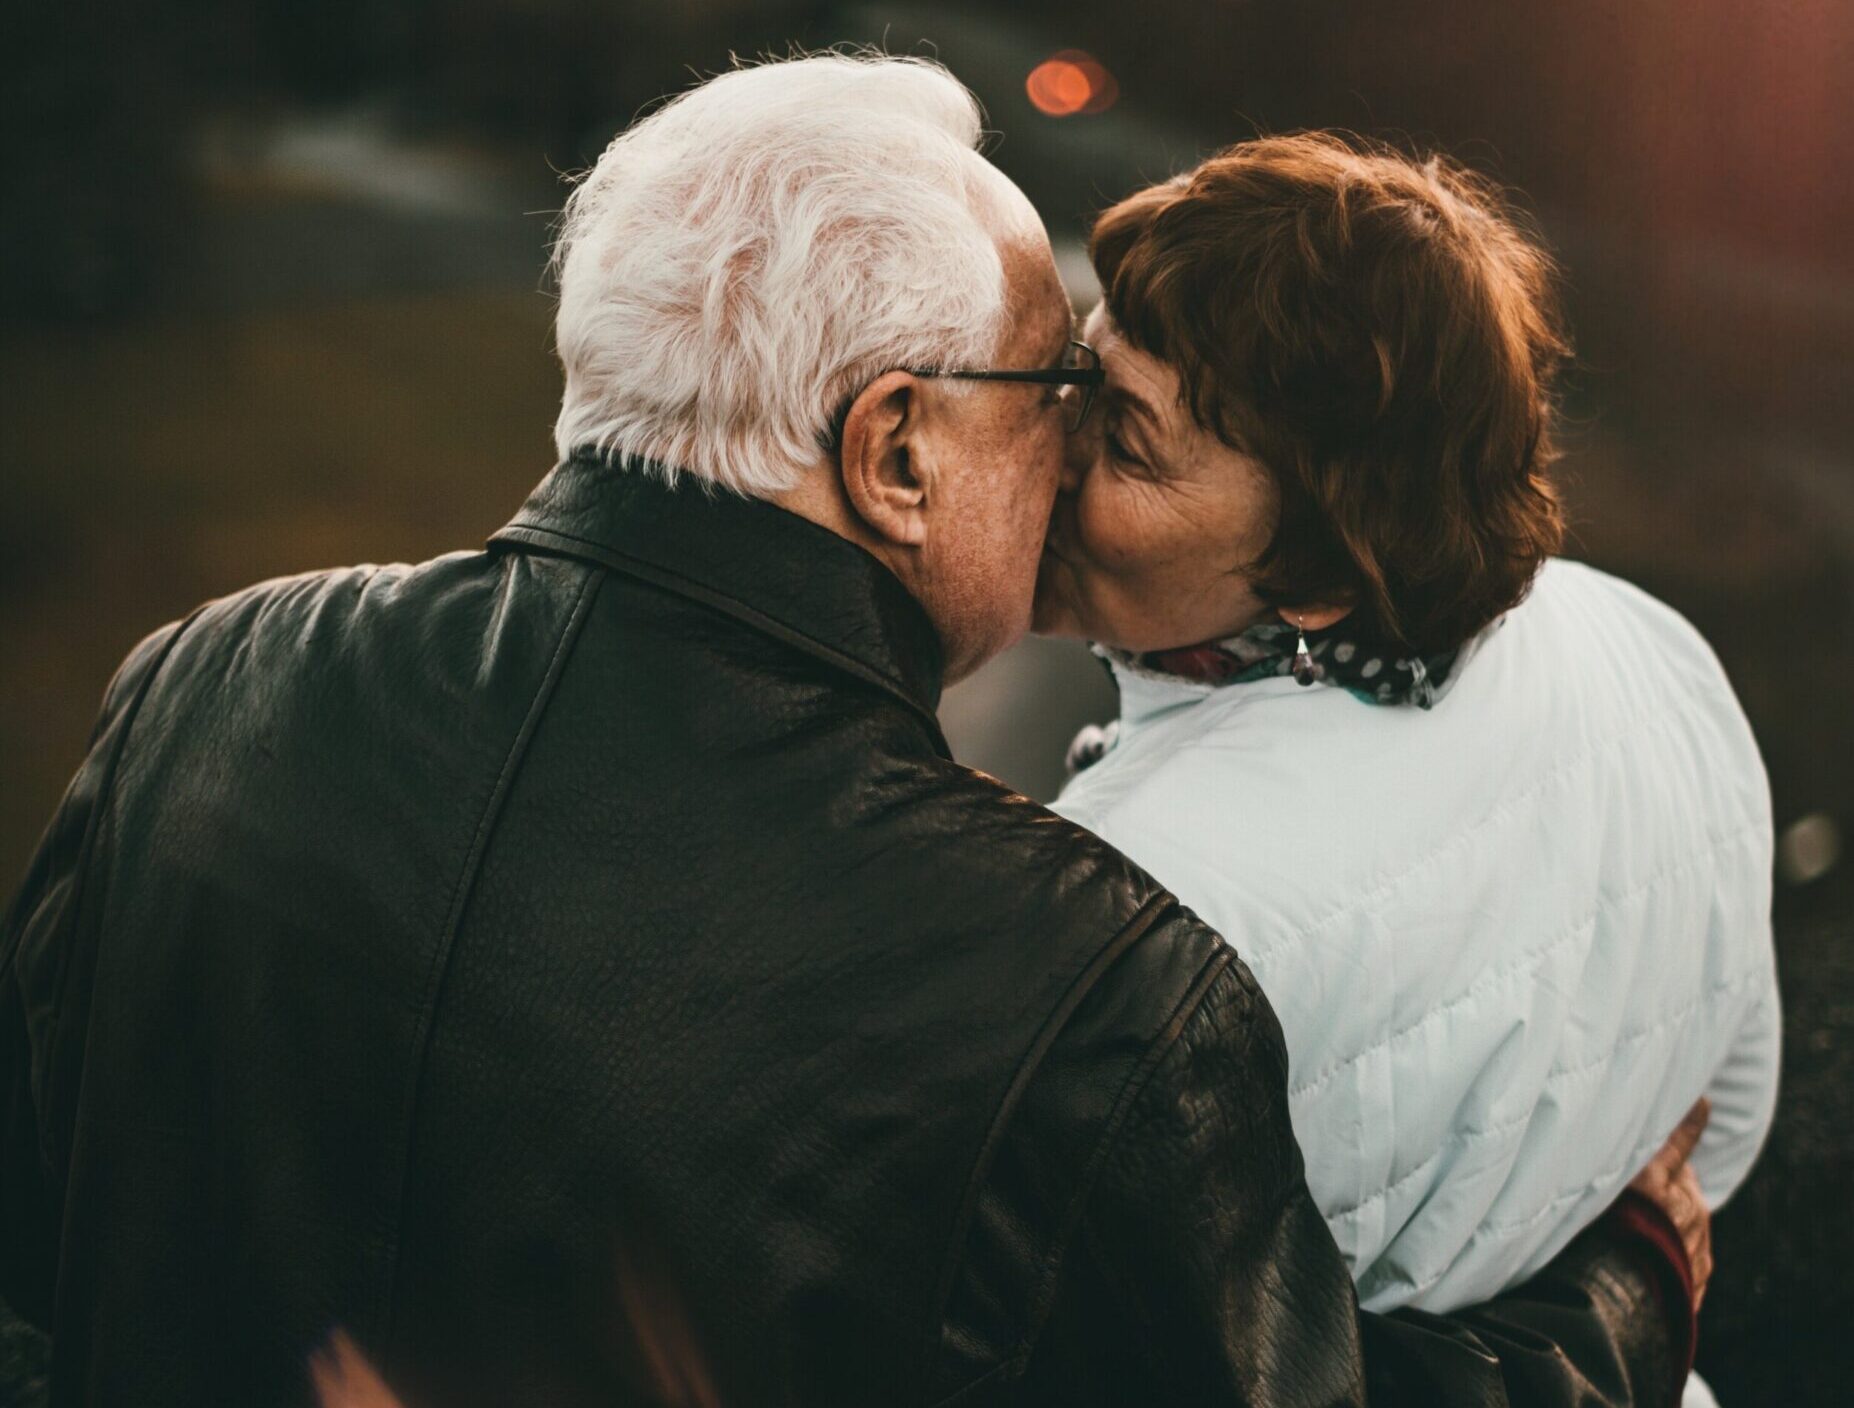 How Older Adults Define Sex—And How Their Views Change Over Time